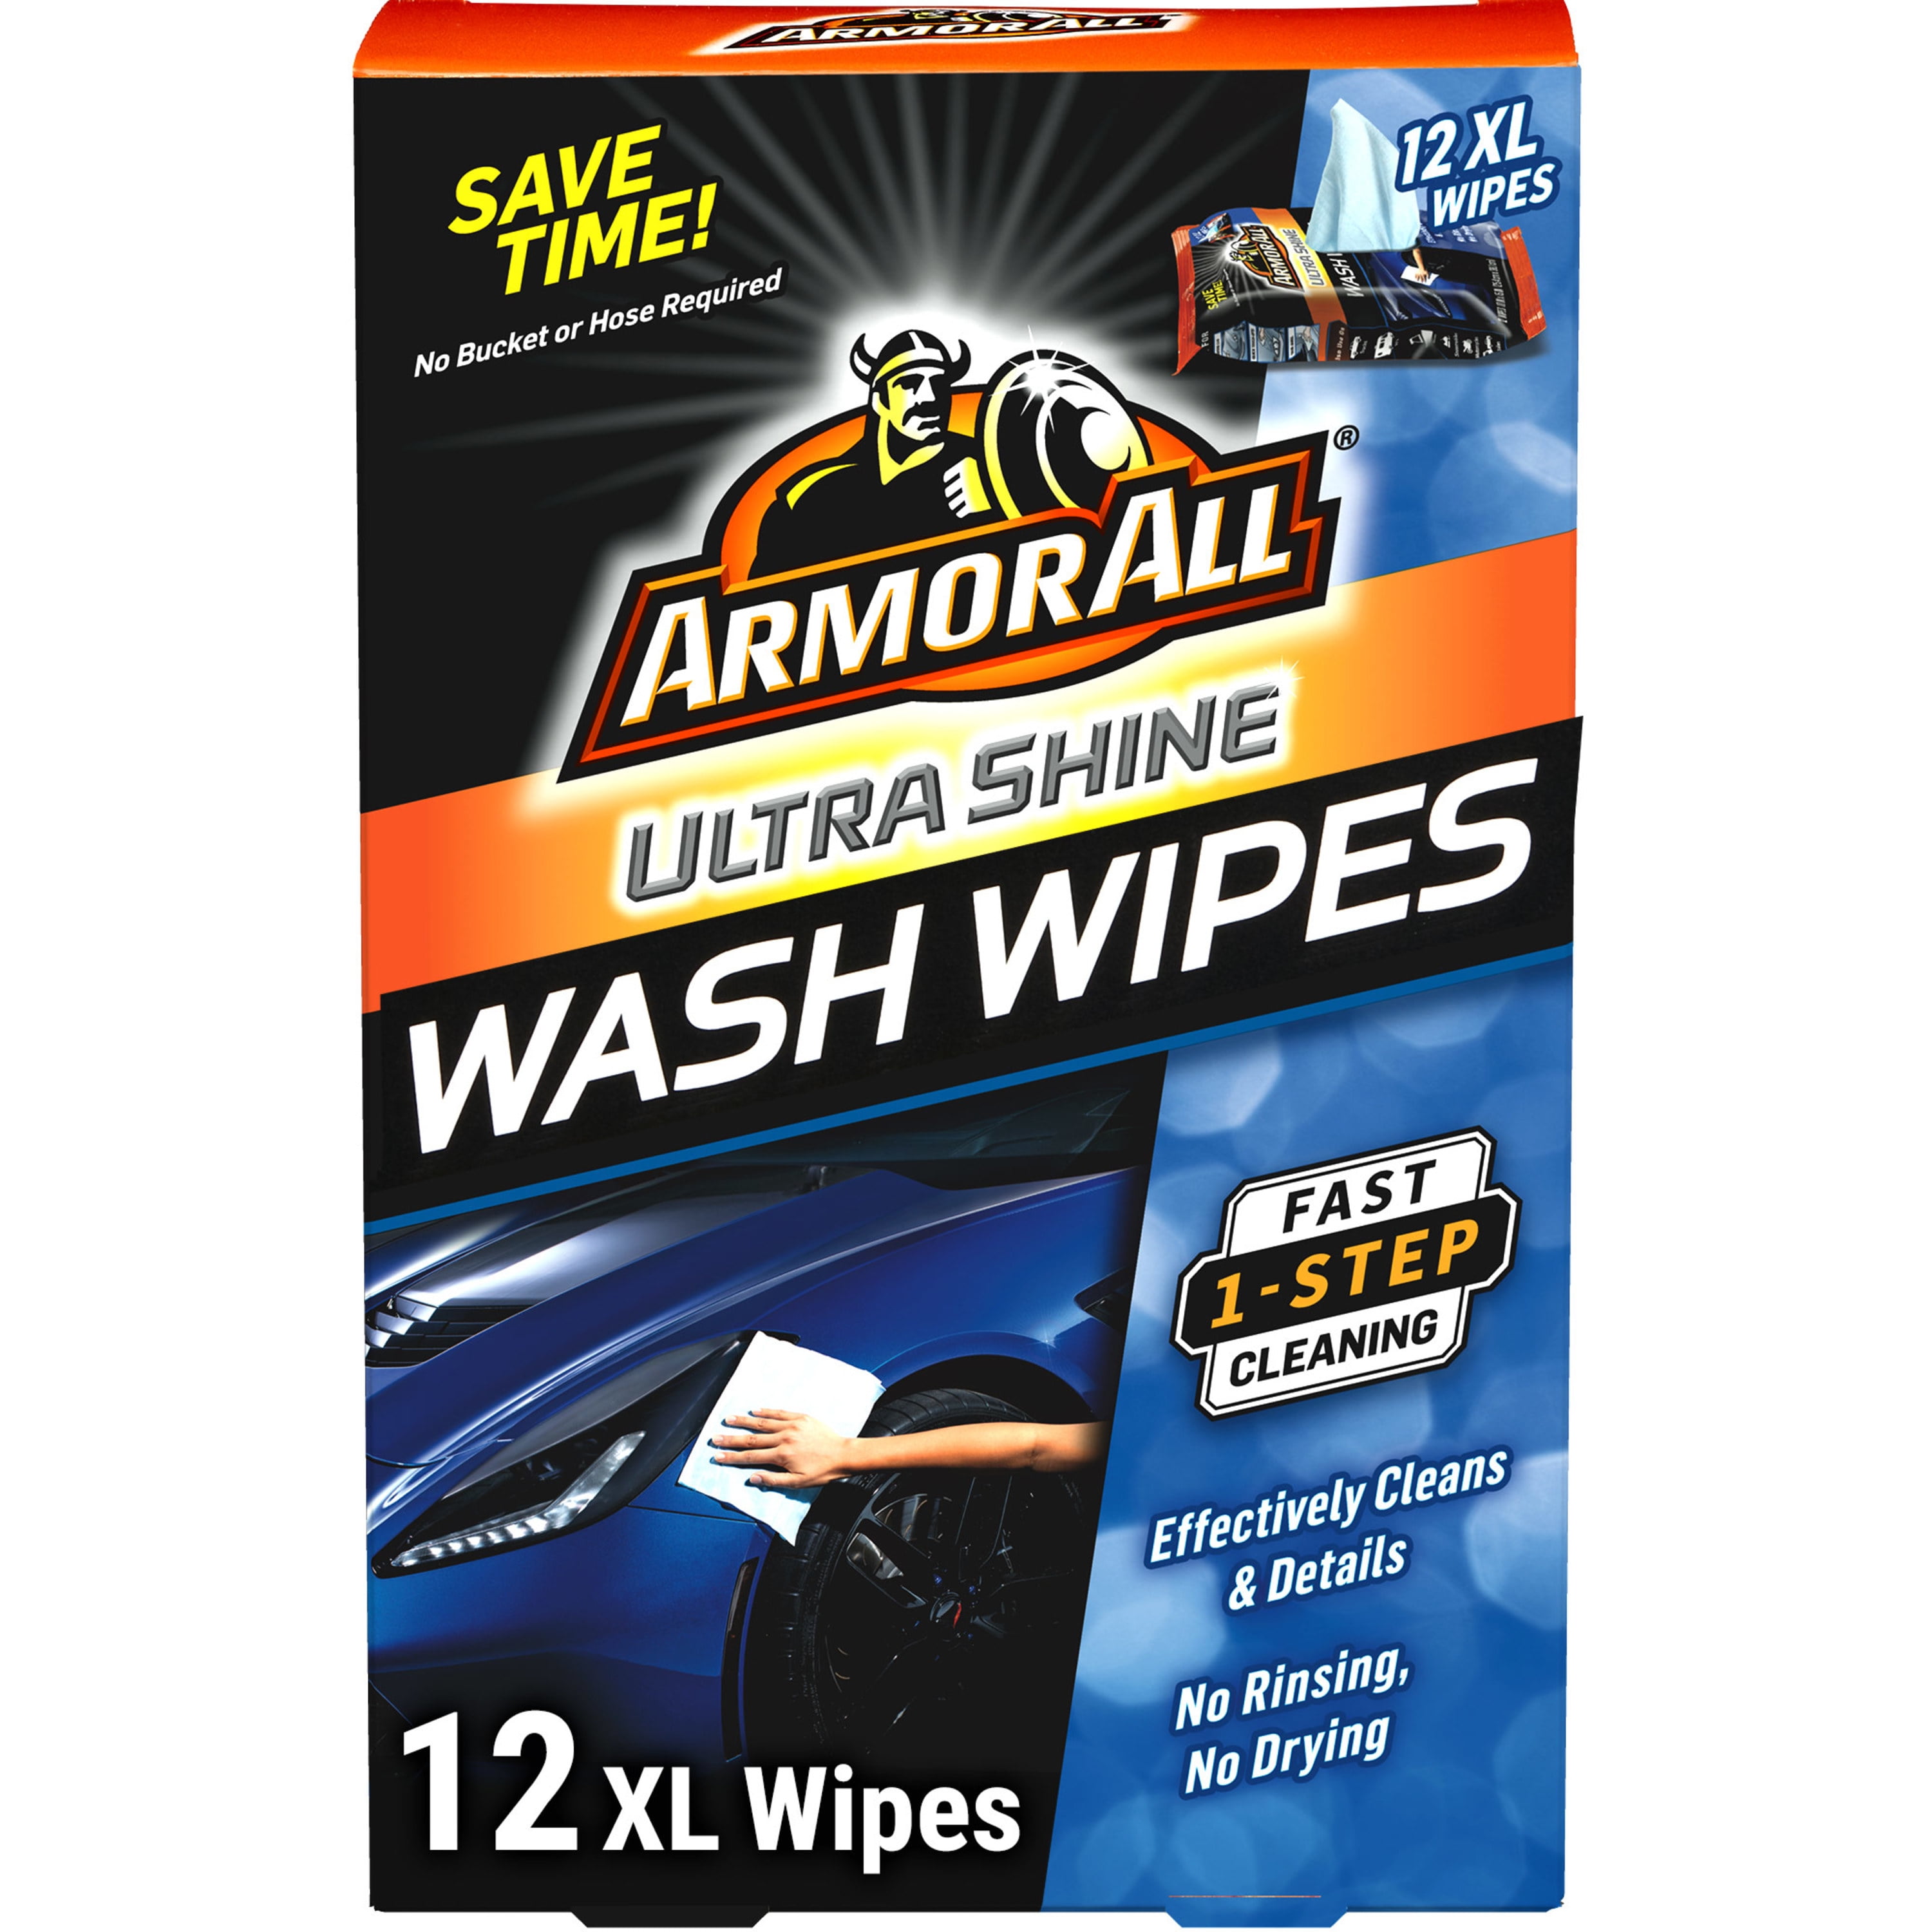 Armor All Ultra Shine Wax Wipes Fast 1-Step Car Waxing 12XL 1 Pack FREE SHIPPING 